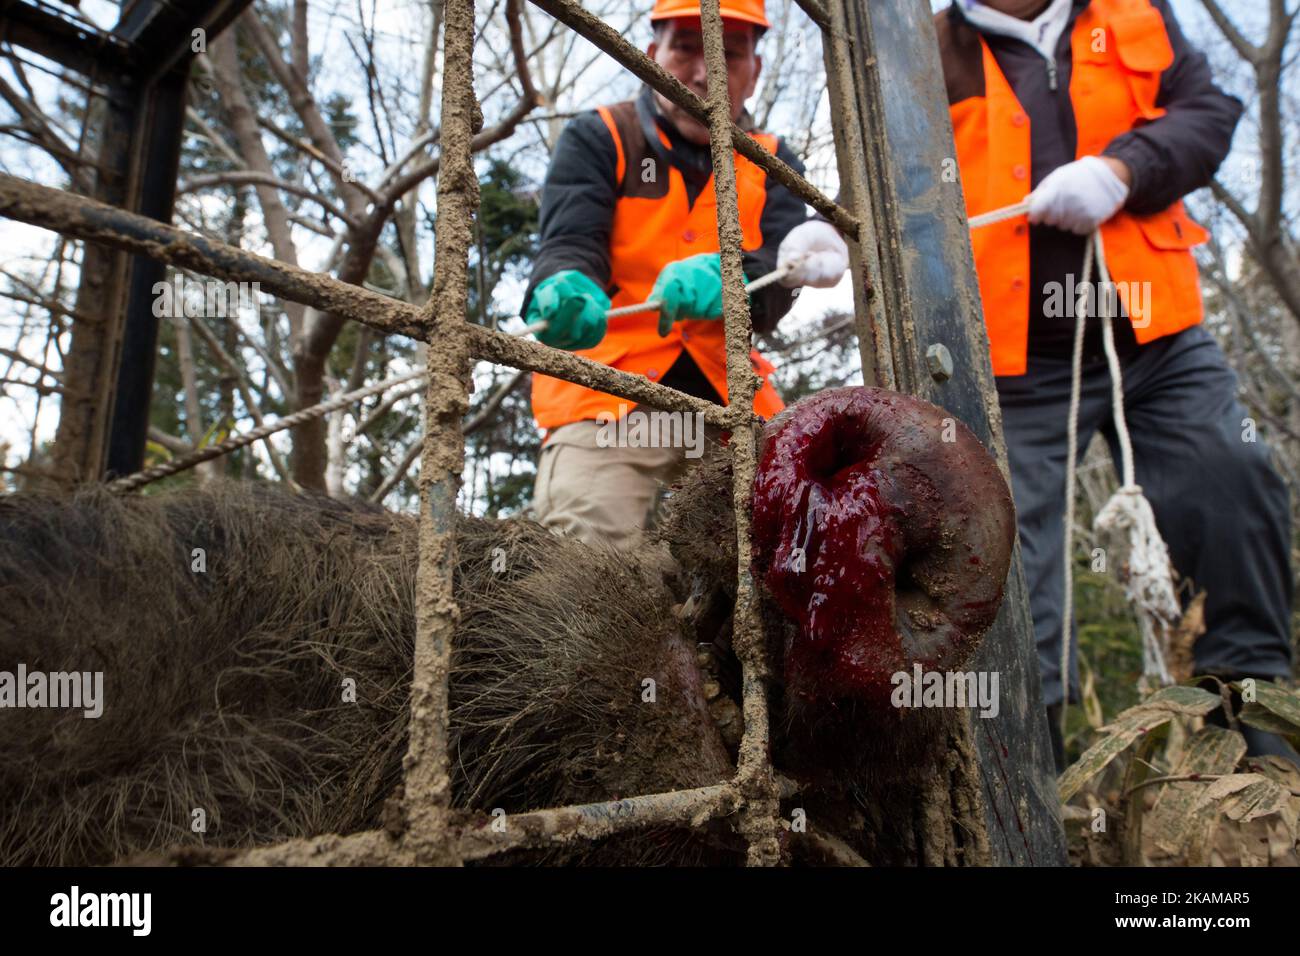 Members of Tomioka Town's animal control hunters group, killed a wild boar roaming around residential area in an evacuation zone near Tokyo Electric Power Co's (TEPCO) tsunami-crippled Fukushima Daiichi nuclear power plant in Tomioka town, Fukushima prefecture, Japan, March 30, 2017. According to team leader Shoichiro Sakamoto, The damage made by the wild boar became very big, and the damages became very serious issue among residents. (Photo by Richard Atrero de Guzman/NurPhoto) *** Please Use Credit from Credit Field *** Stock Photo